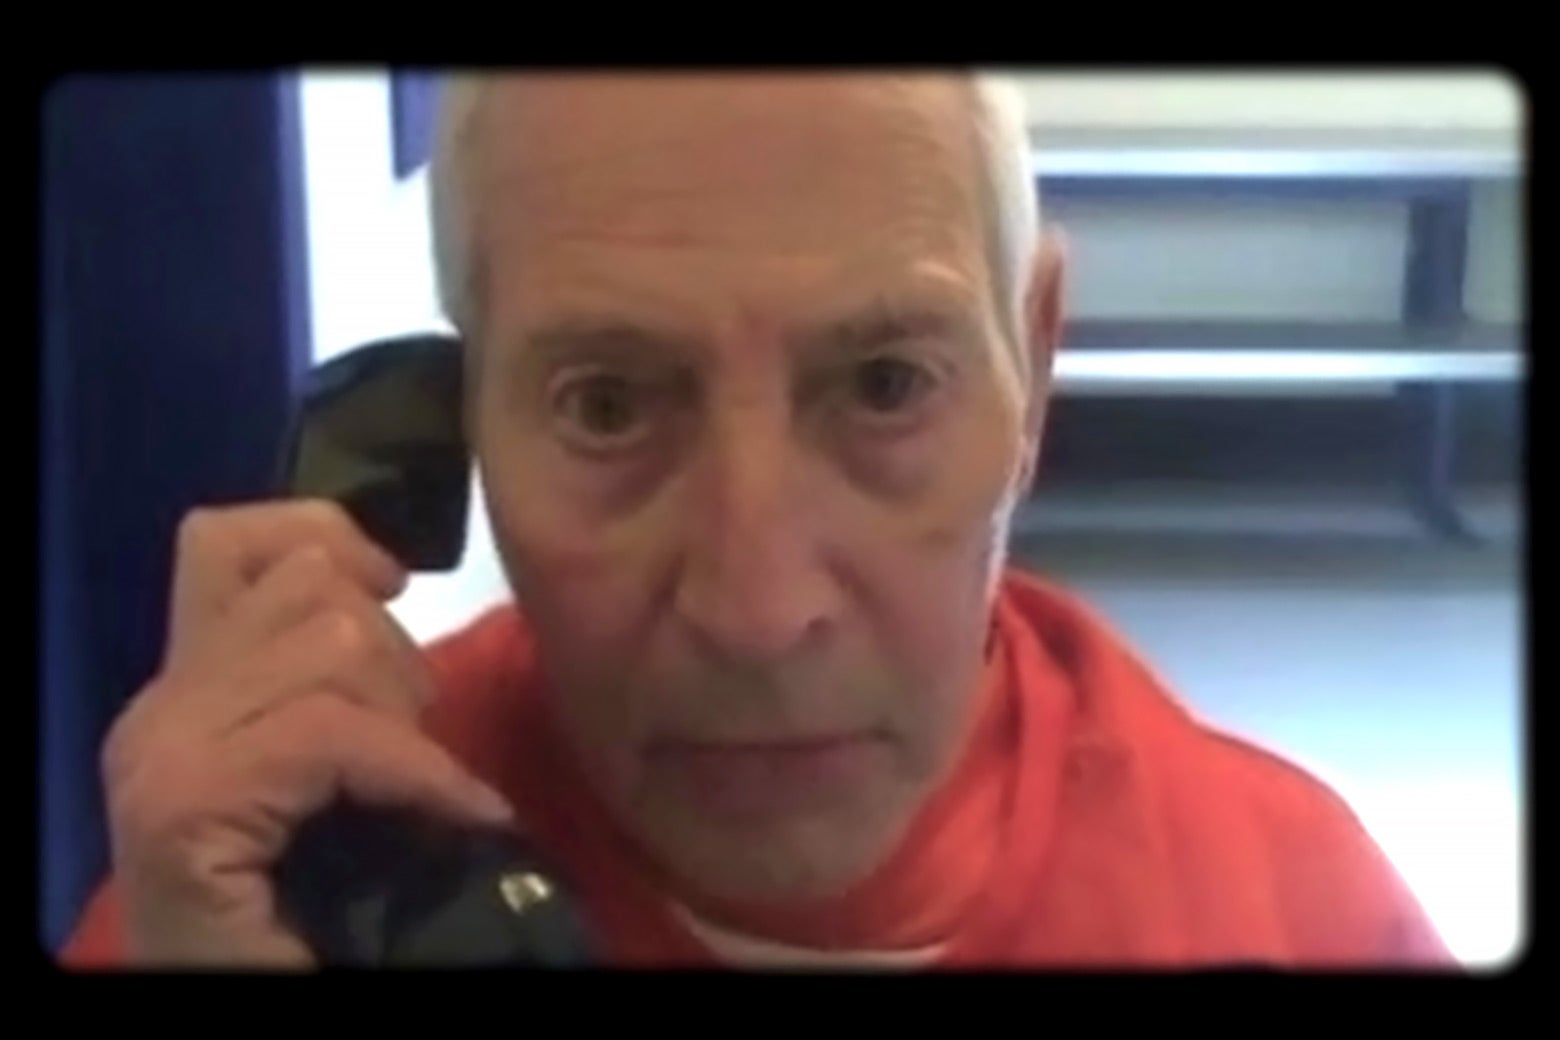 Robert Durst speaks on a prison phone and wears an orange jumpsuit in a scene from the docuseries.